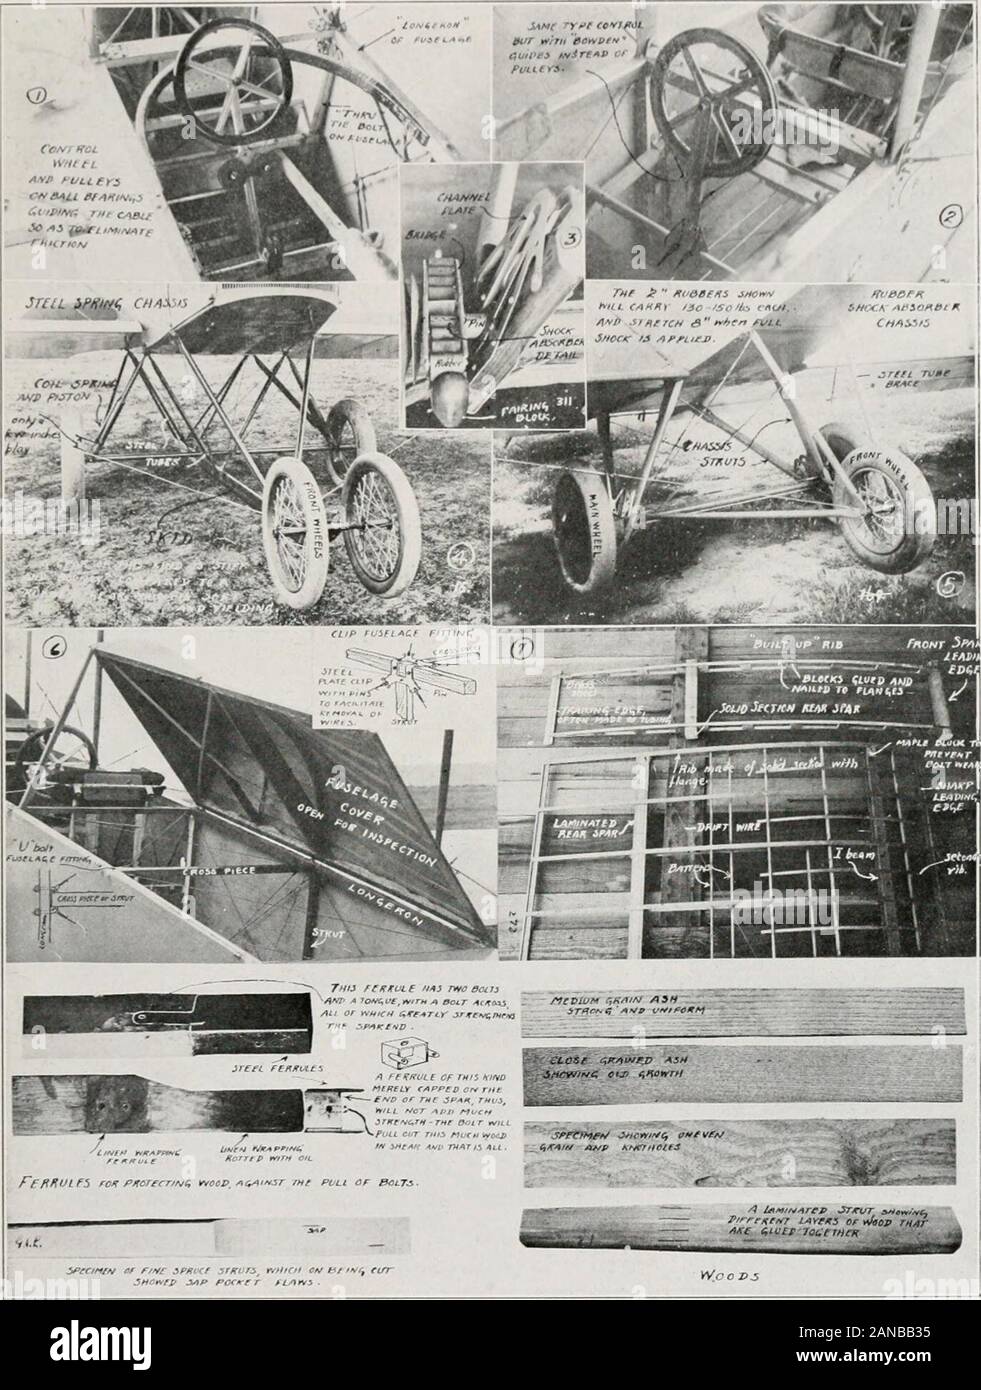 Military aeroplanes; an explanatory consideration of their characteristics, performances, construction, maintenance, and operation, for the use of aviators . ftAretnrrm ? fi-jr (AKf .vtJ/ £*/ 7AtrtM 1, 2, 3, 4. Various single and (IouIjIc pulk- arraniicnKnts for control cables,—5. The Curtiss double U bolt fitting.—6. the Burgess eli]) fitting.—7. TheCurtiss single l bolt fitting. —cS. Signal Corps, jiin and i)late fitting. —9. The steelblock- and eye head strut bolt fitting used on German aeroplanes. —10. The Wrighthook- fitting.—11-12. Hinge details. 131. 1. Control with cables and pulleys Stock Photo